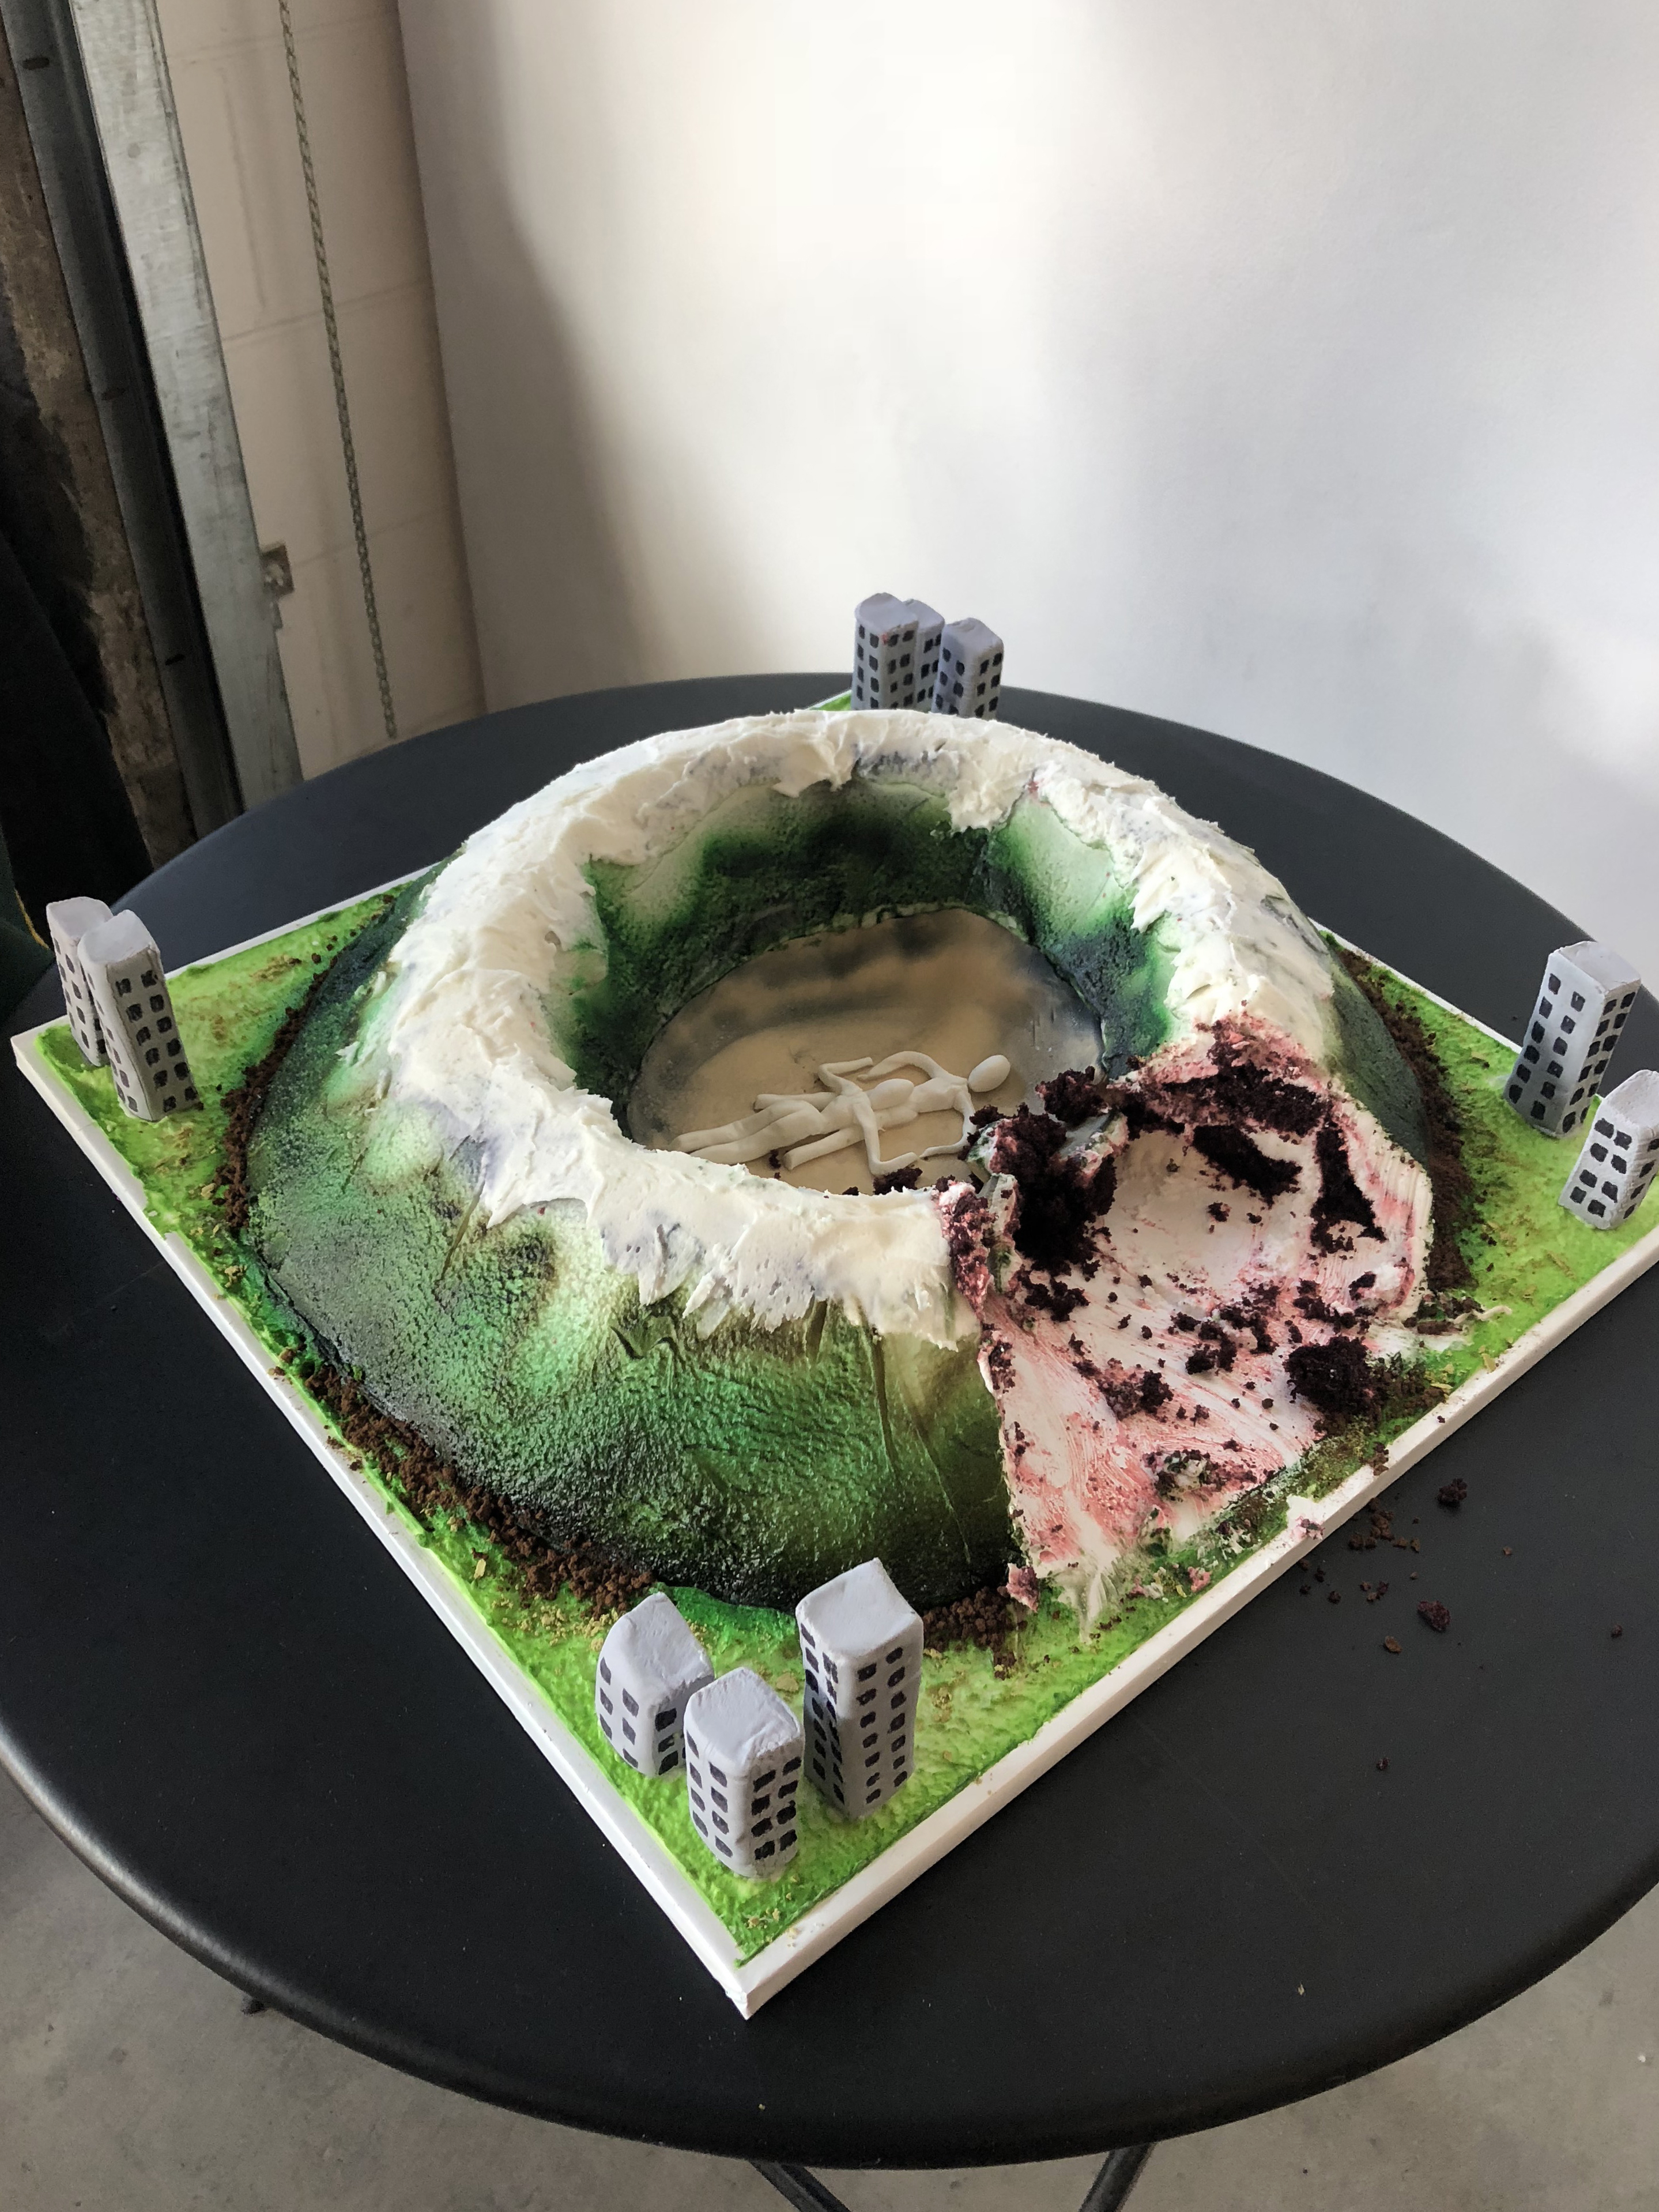 A cake shaped like a mountainous crater with two figures engaged in felatio in the center surrounded by buildings with a big slice cut out on a black table